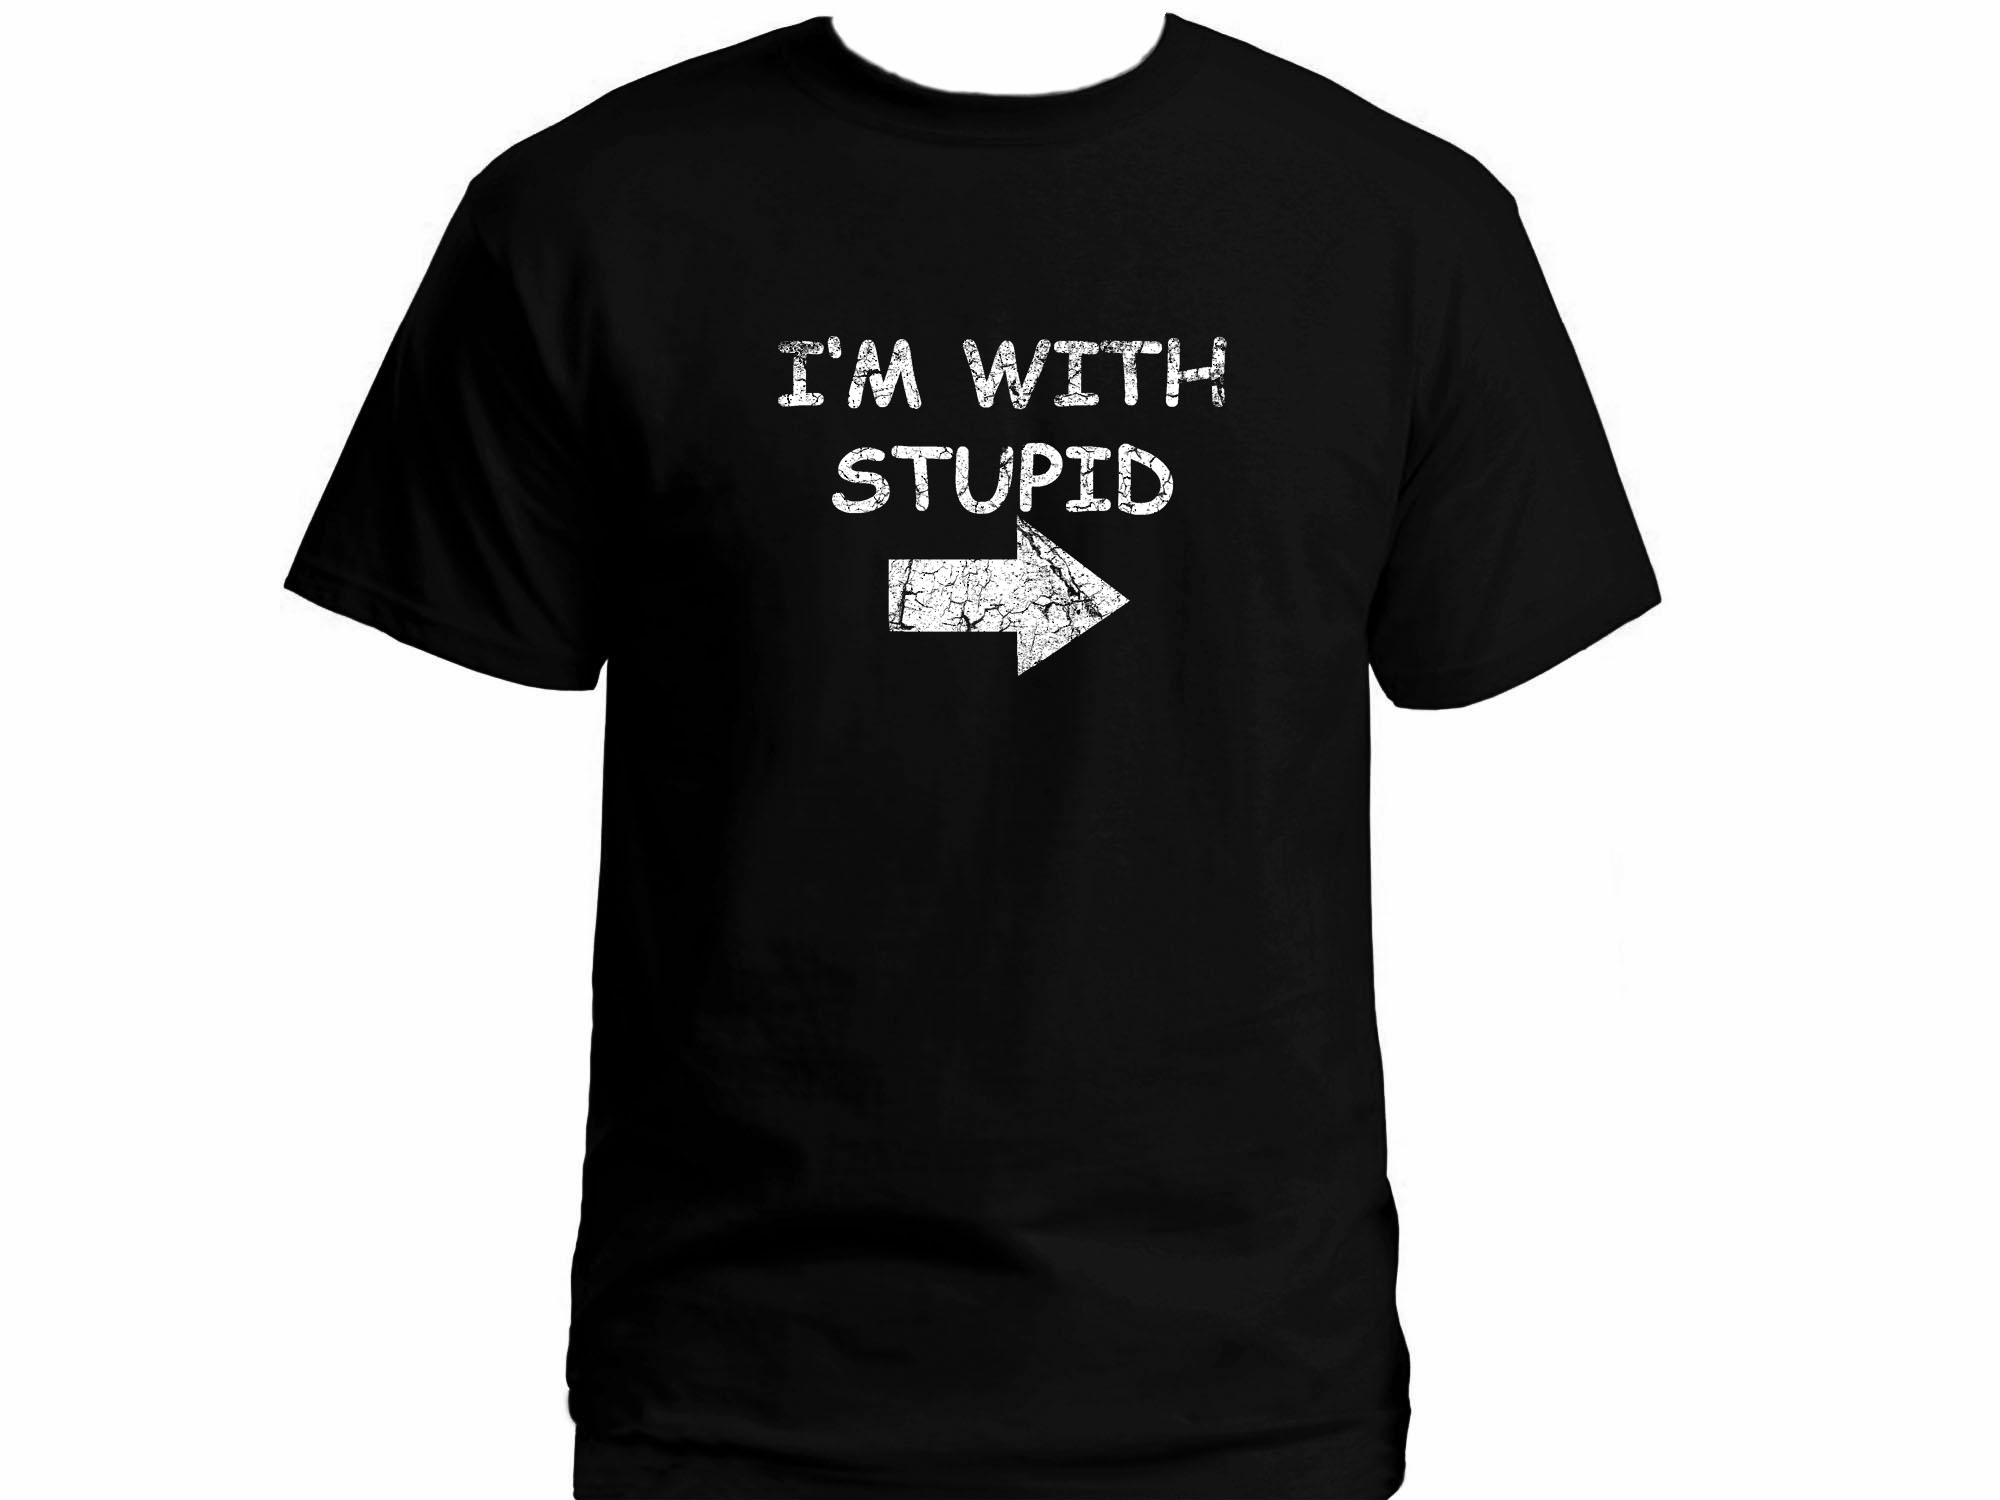 I'm with stupid distressed print funny humor t-shirt